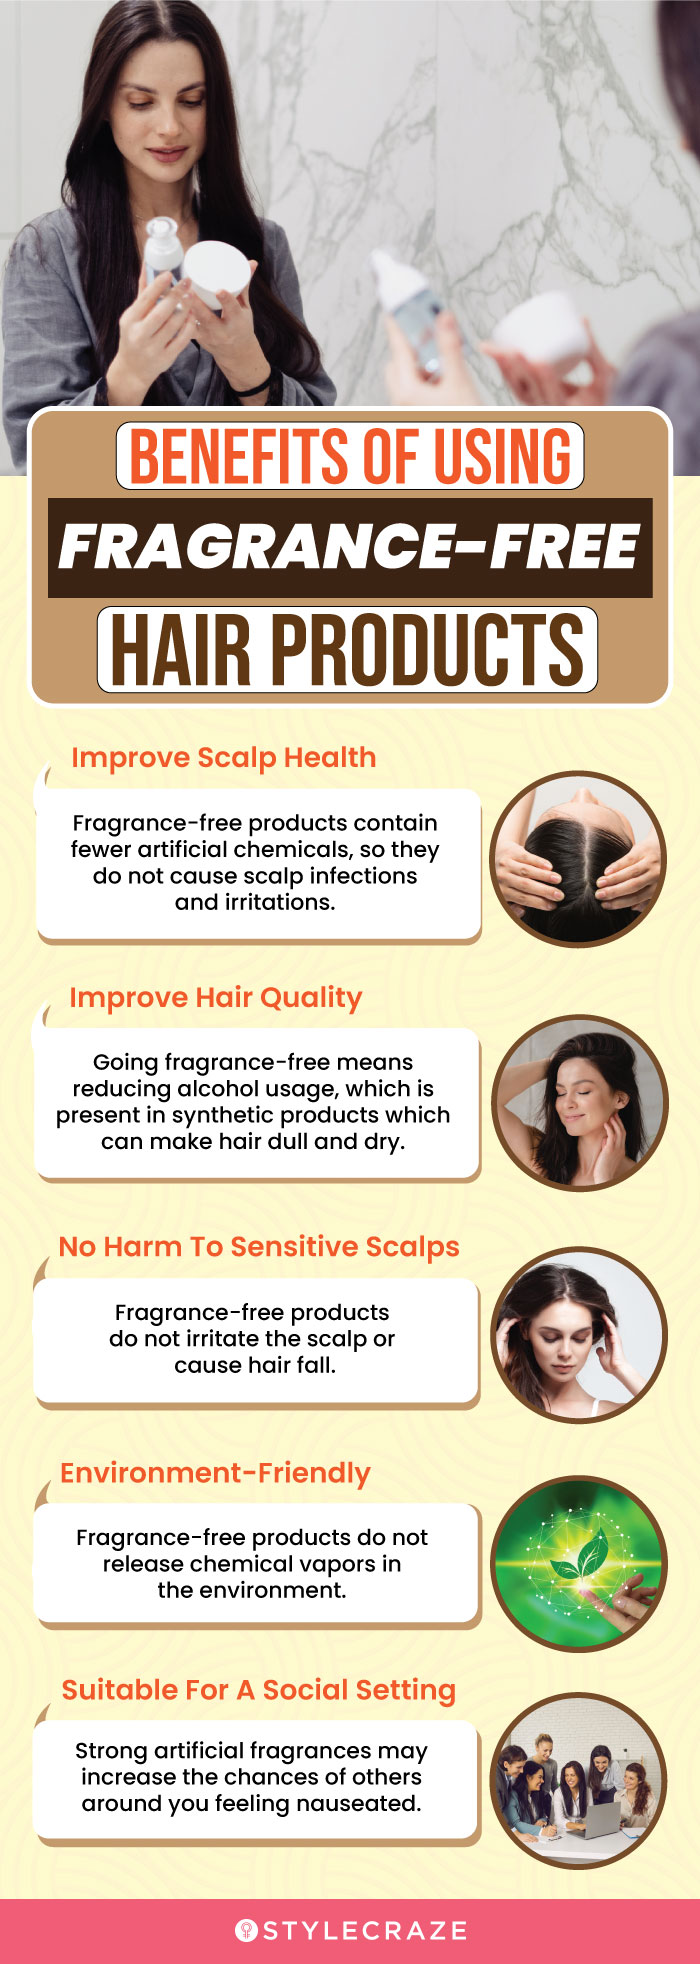 Benefits Of Using Fragrance-Free Hair Products (infographic)